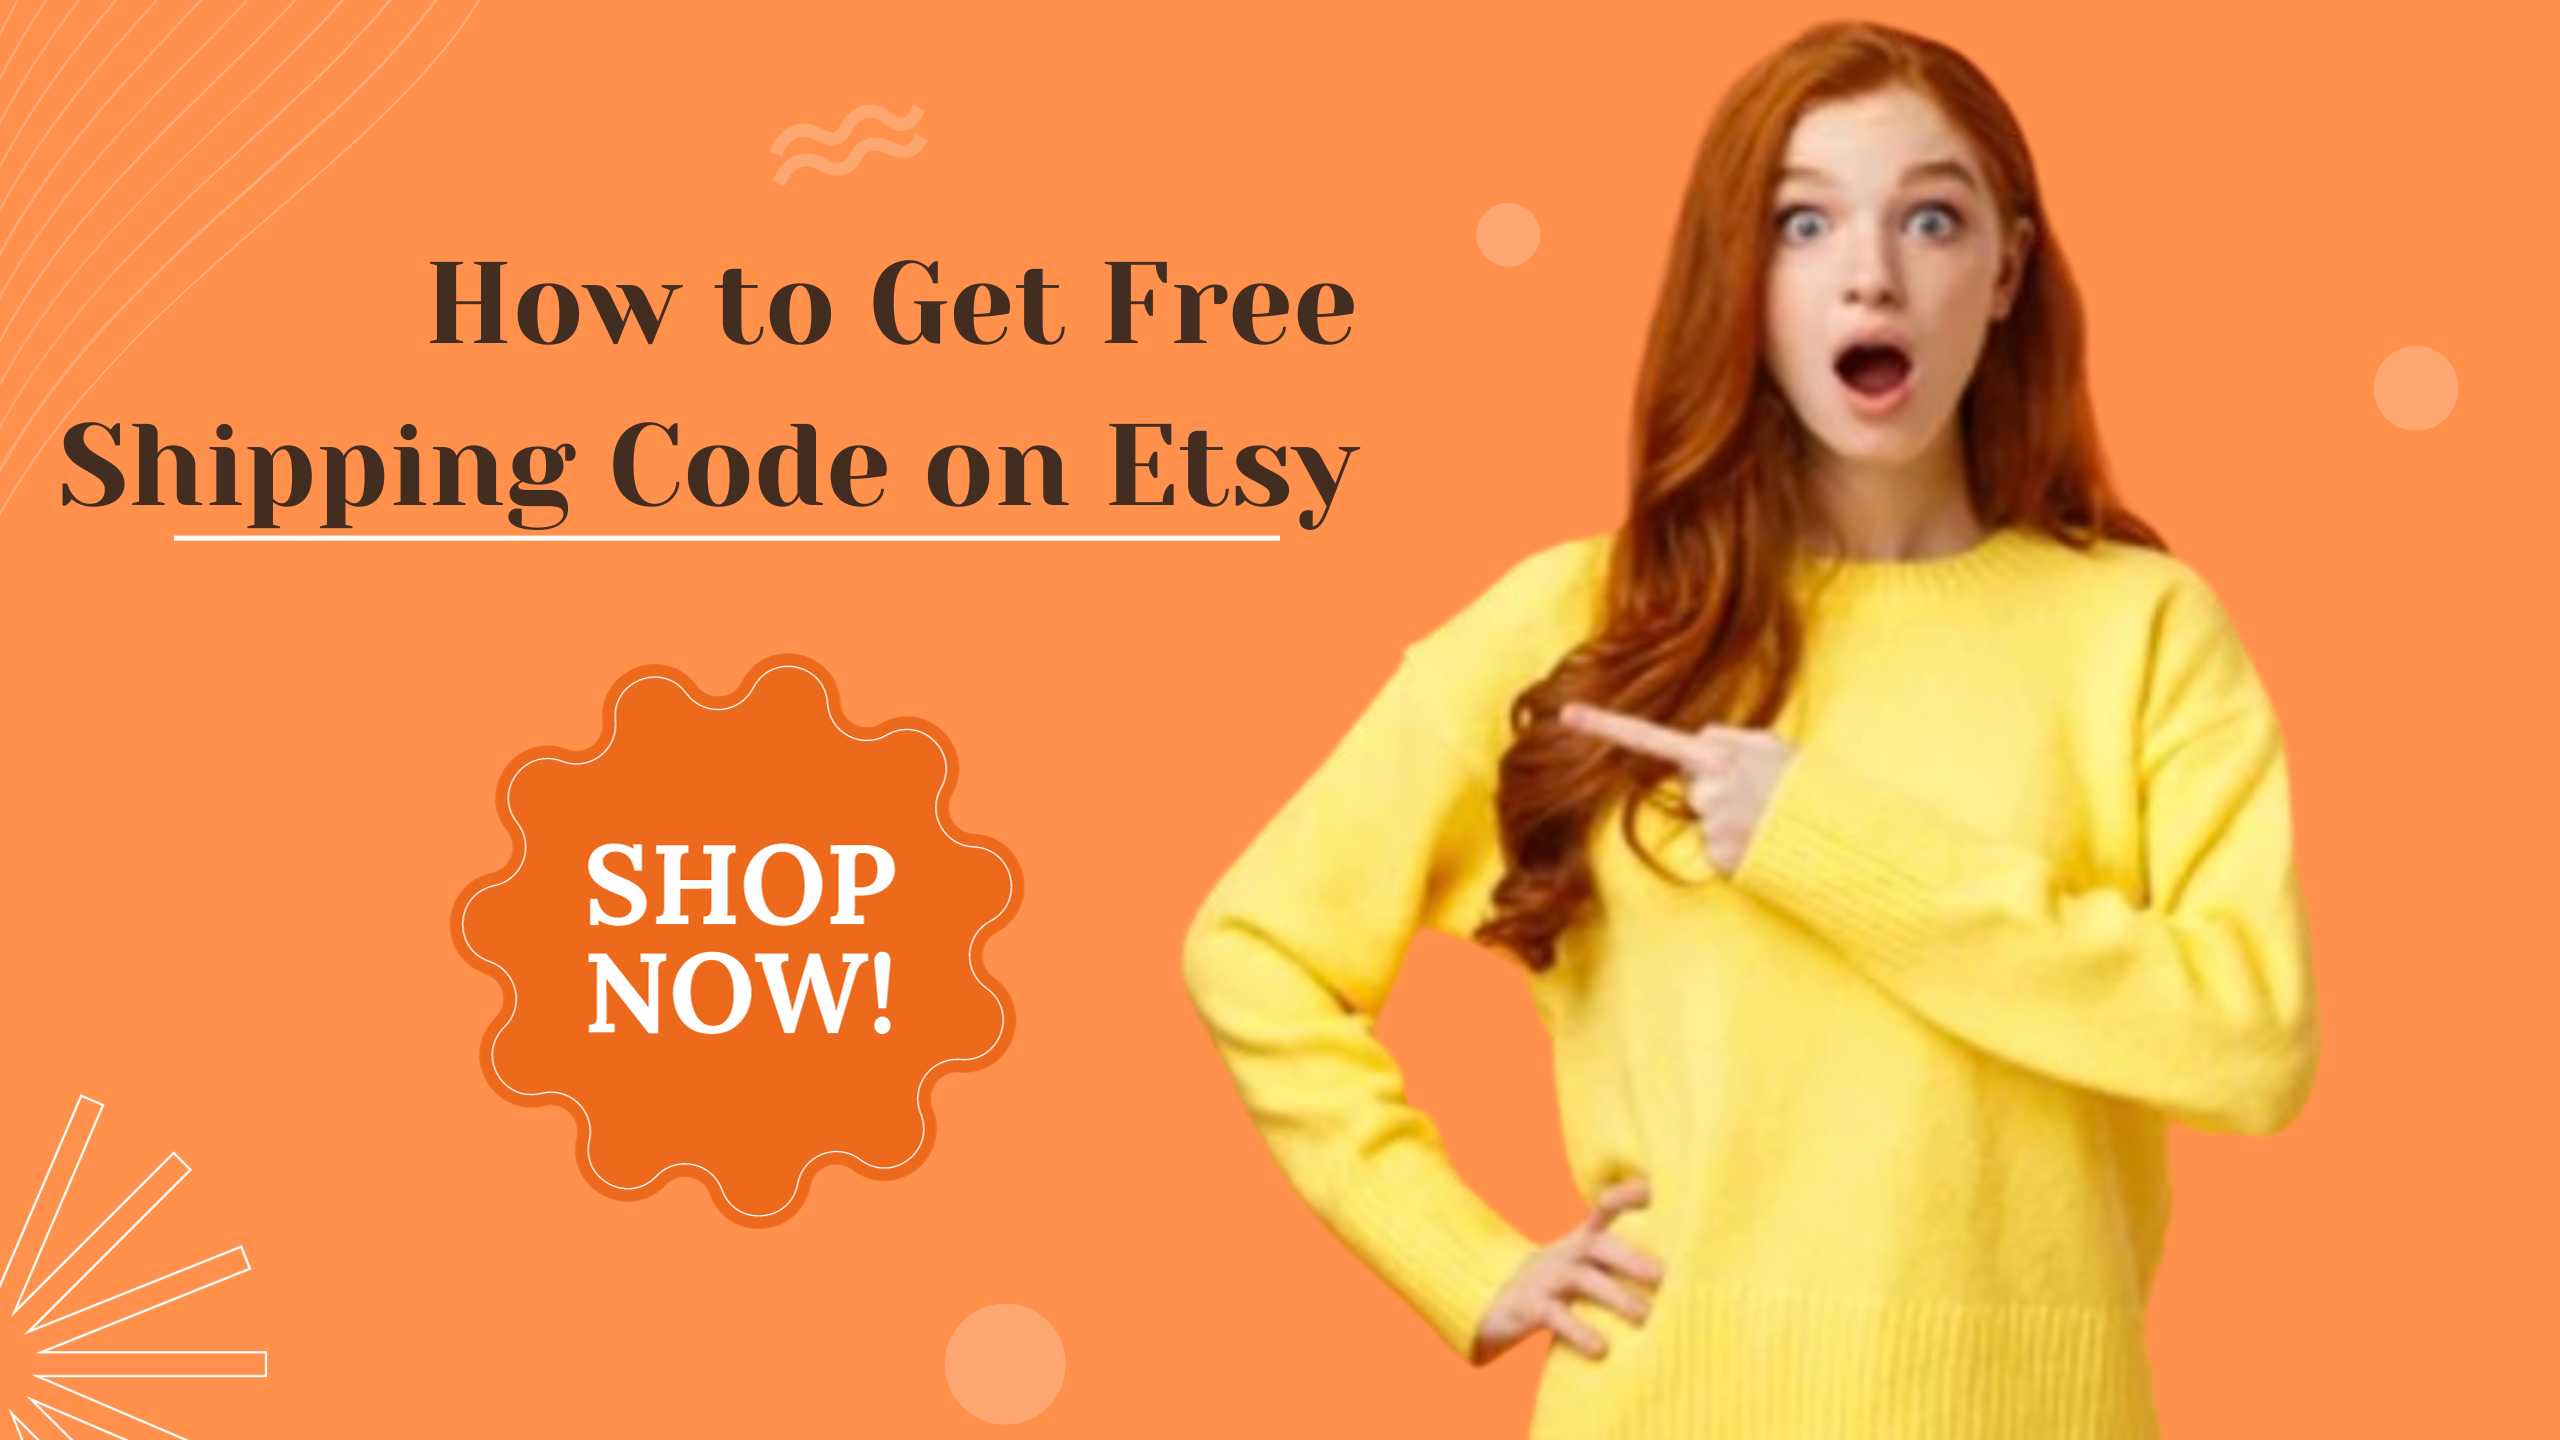 How to Get Free Shipping Code on Etsy